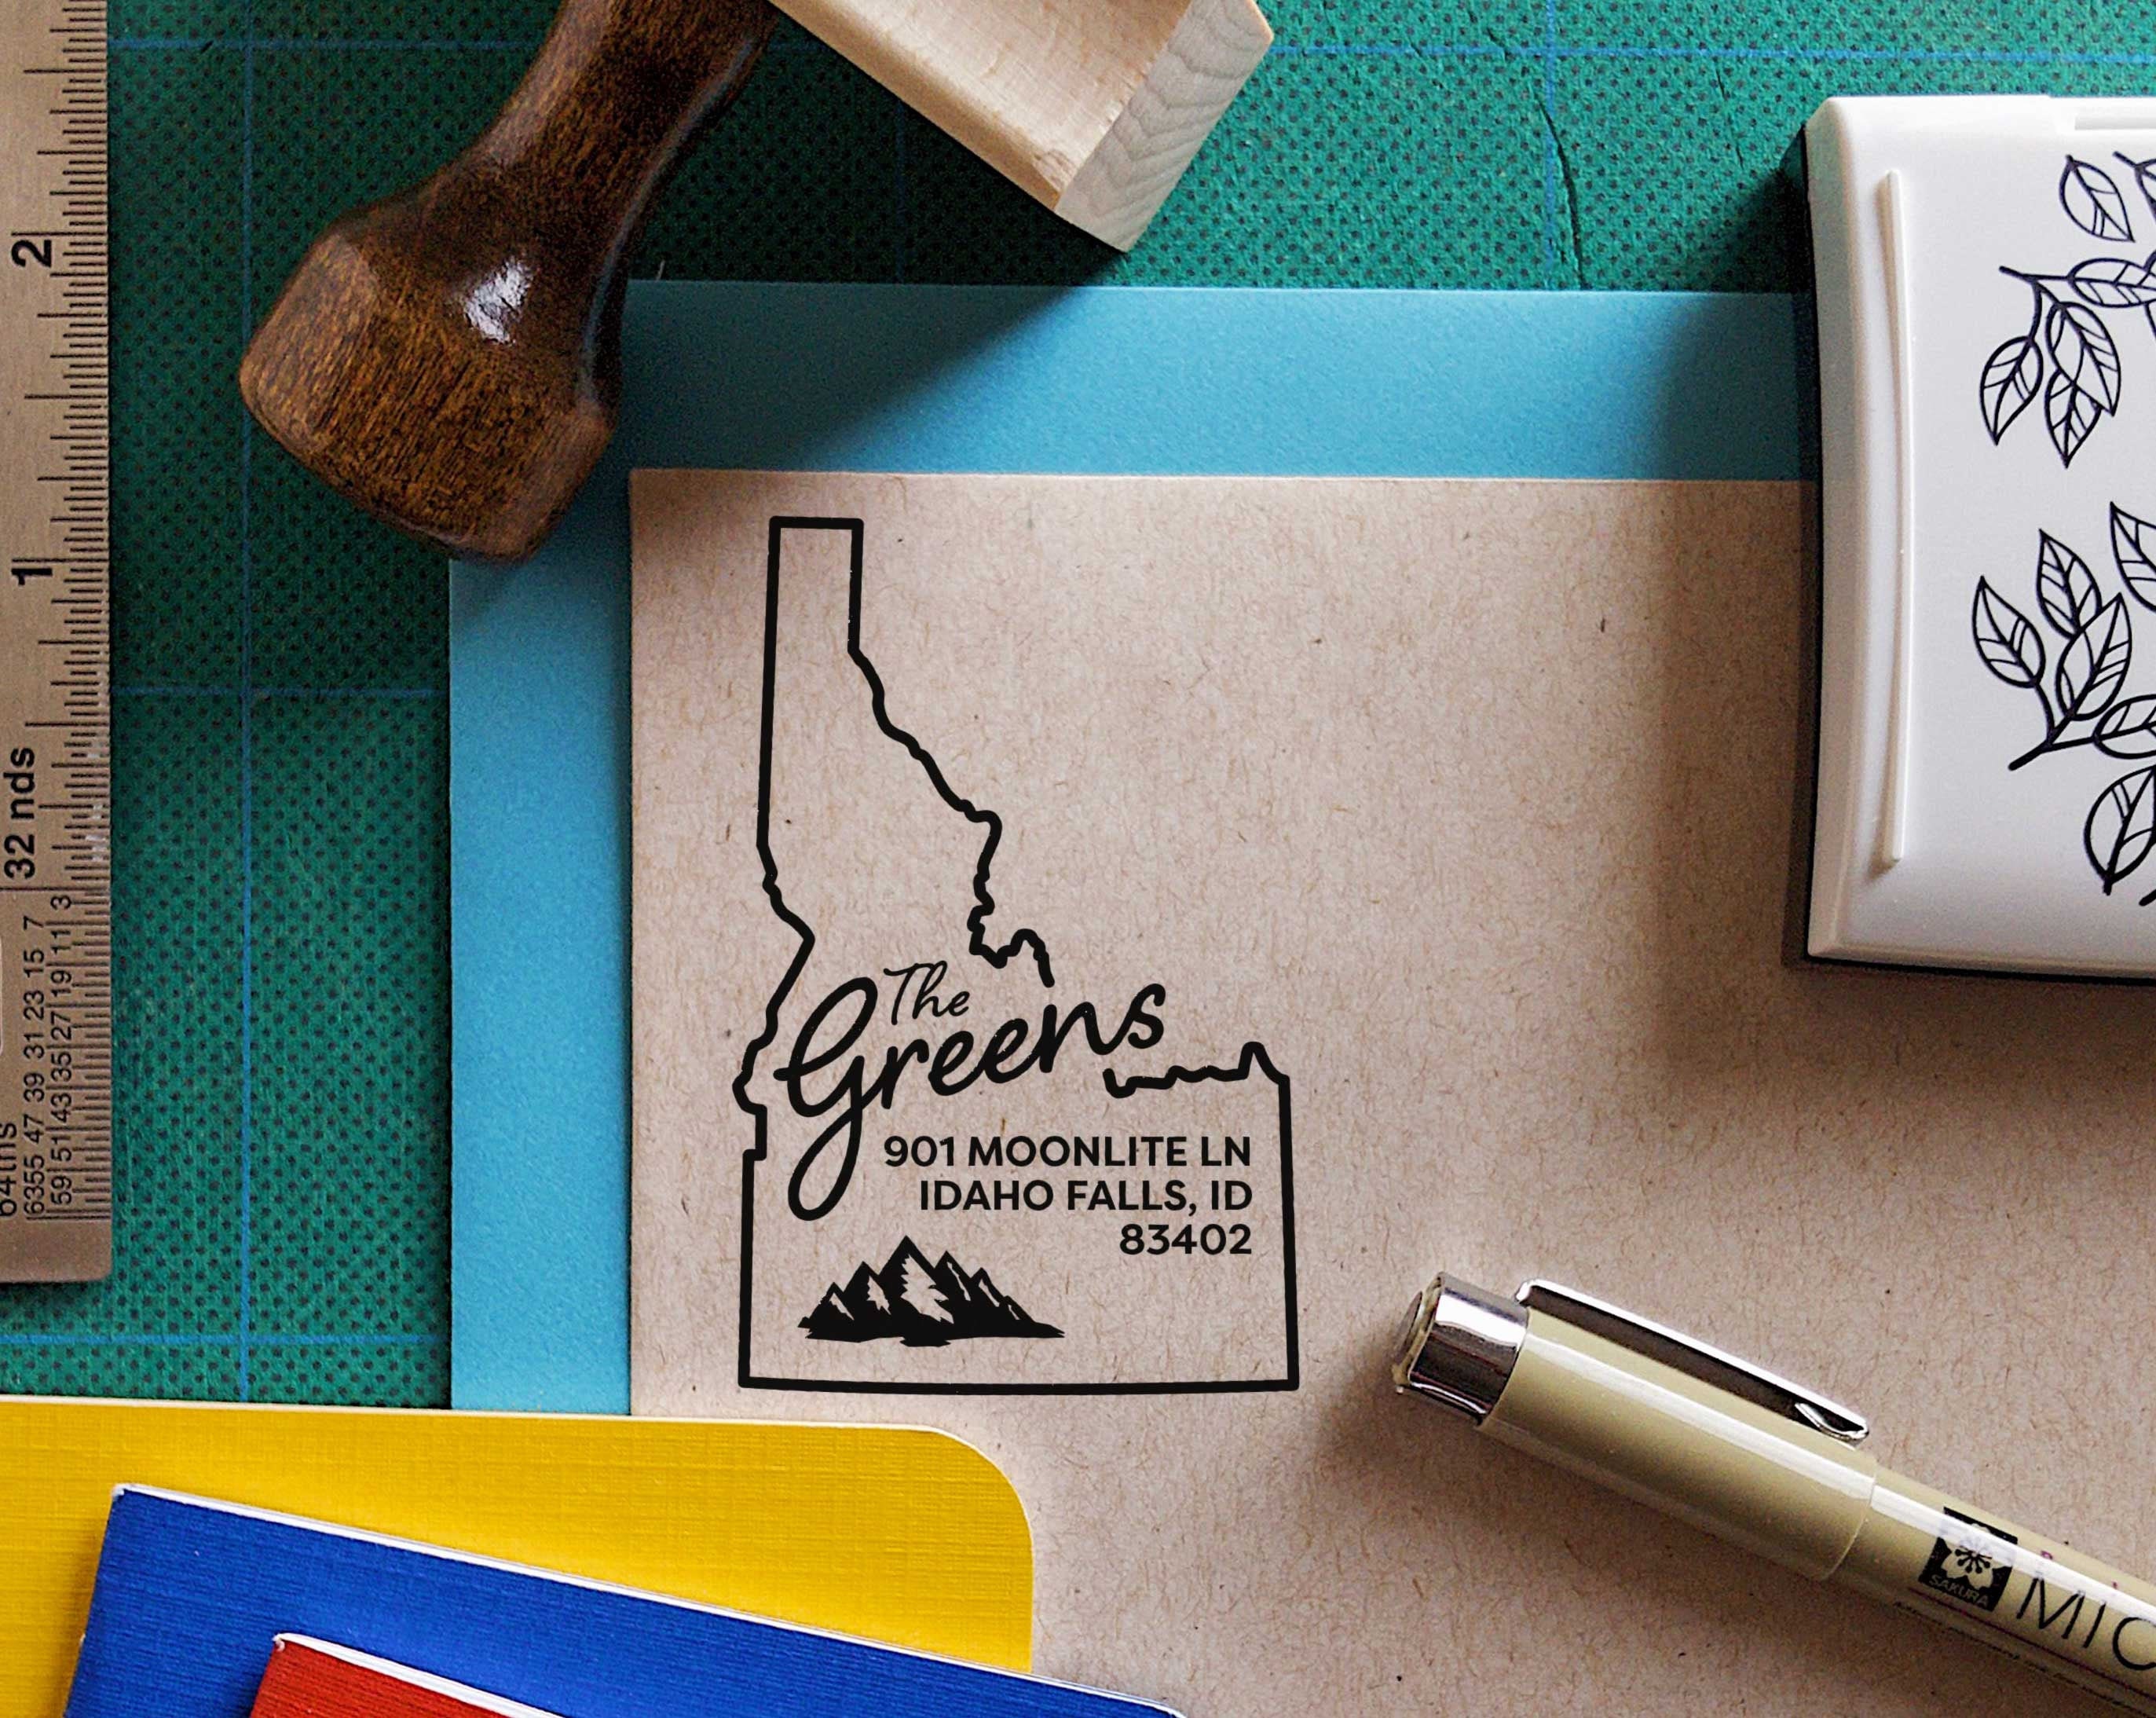 SS-48 Thank You Stamp: Wood Handle, Self-Inking or Pre-Inked